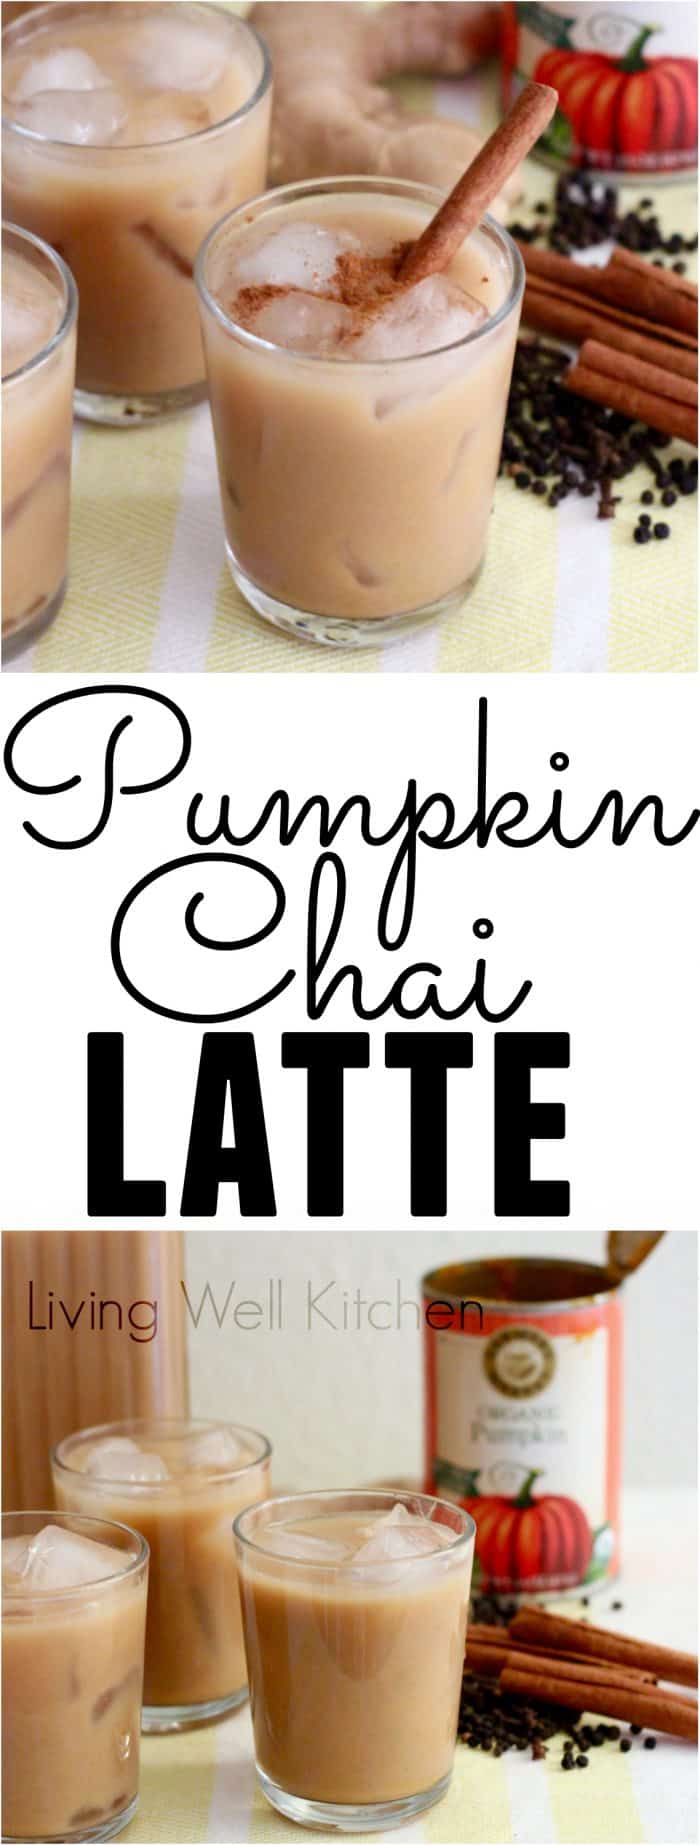 These Pumpkin Chai Lattes are the tea version of a pumpkin spiced latte. Using tons of warming spices makes this homemade version much healthier and even more delicious! Great way to introduce the fall season to your morning cuppa